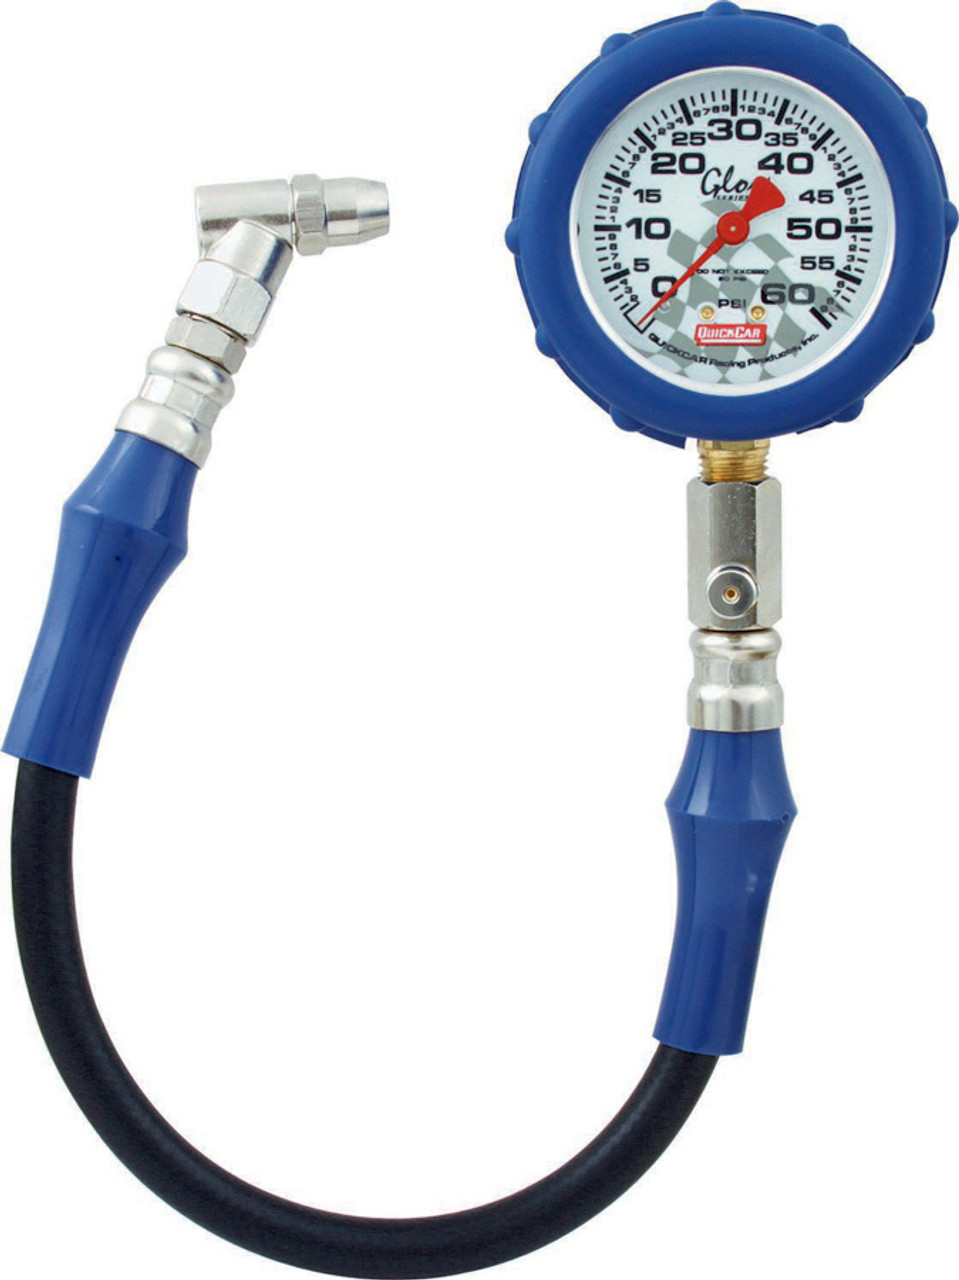 QuickCar Racing Products Tire Gauge 60 PSI Glo Gauge